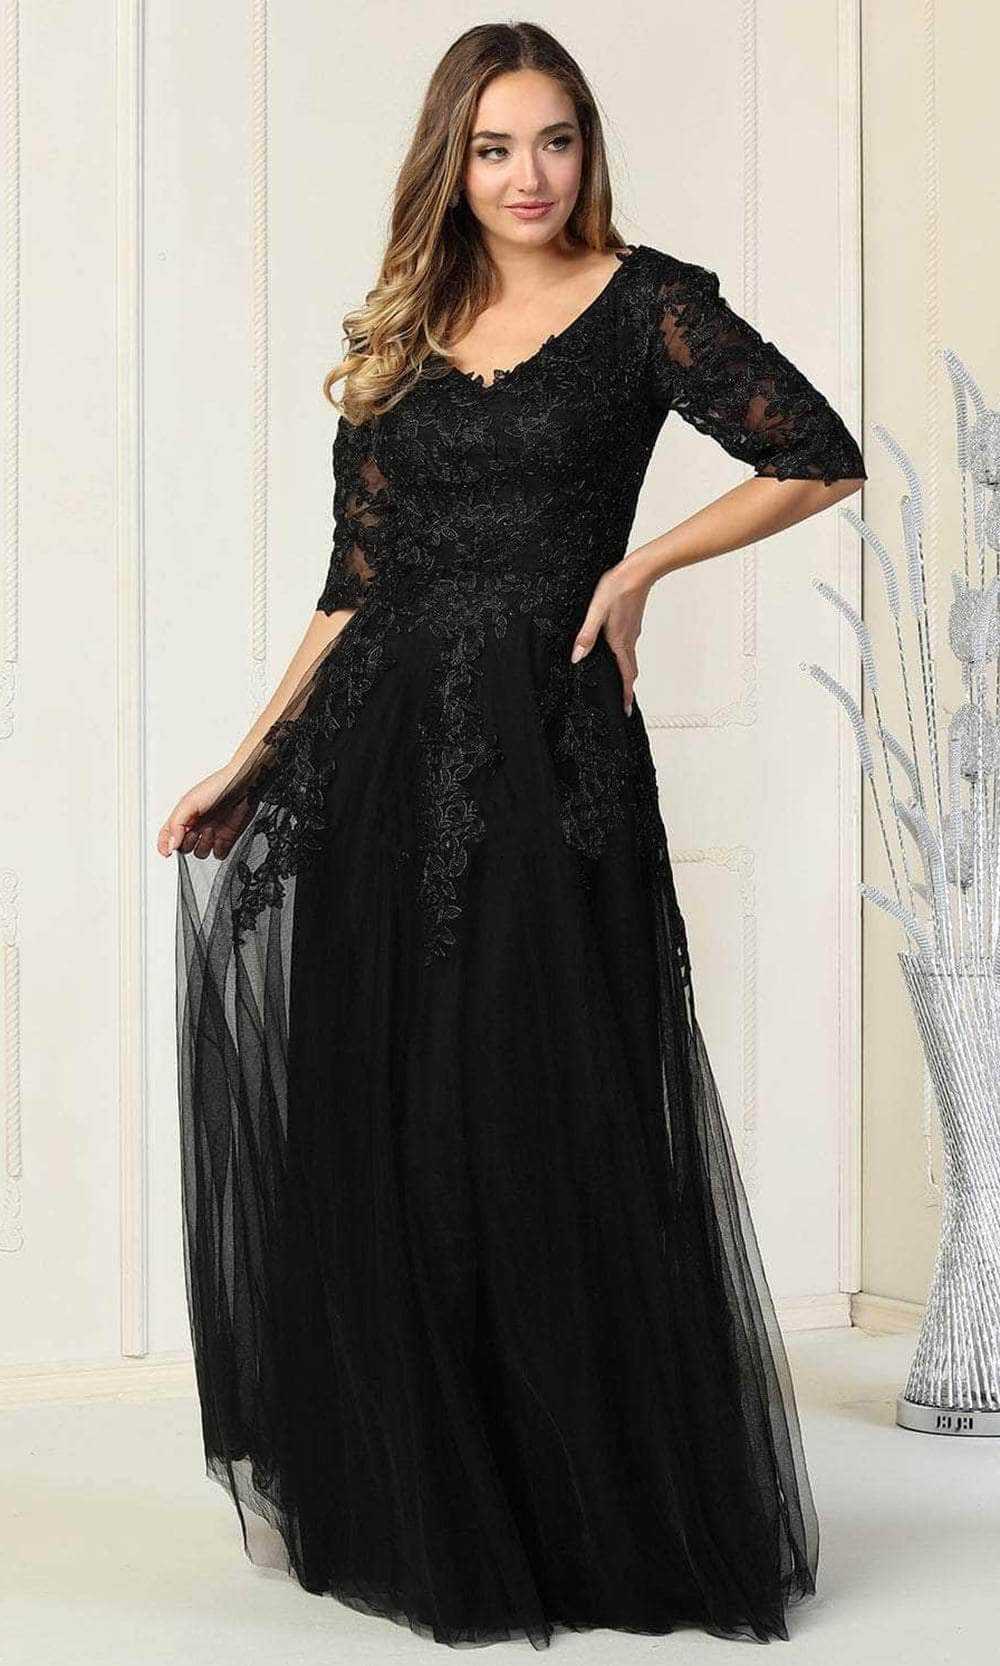 May Queen, May Queen MQ1859 - Elbow Sleeve Lace Formal Gown